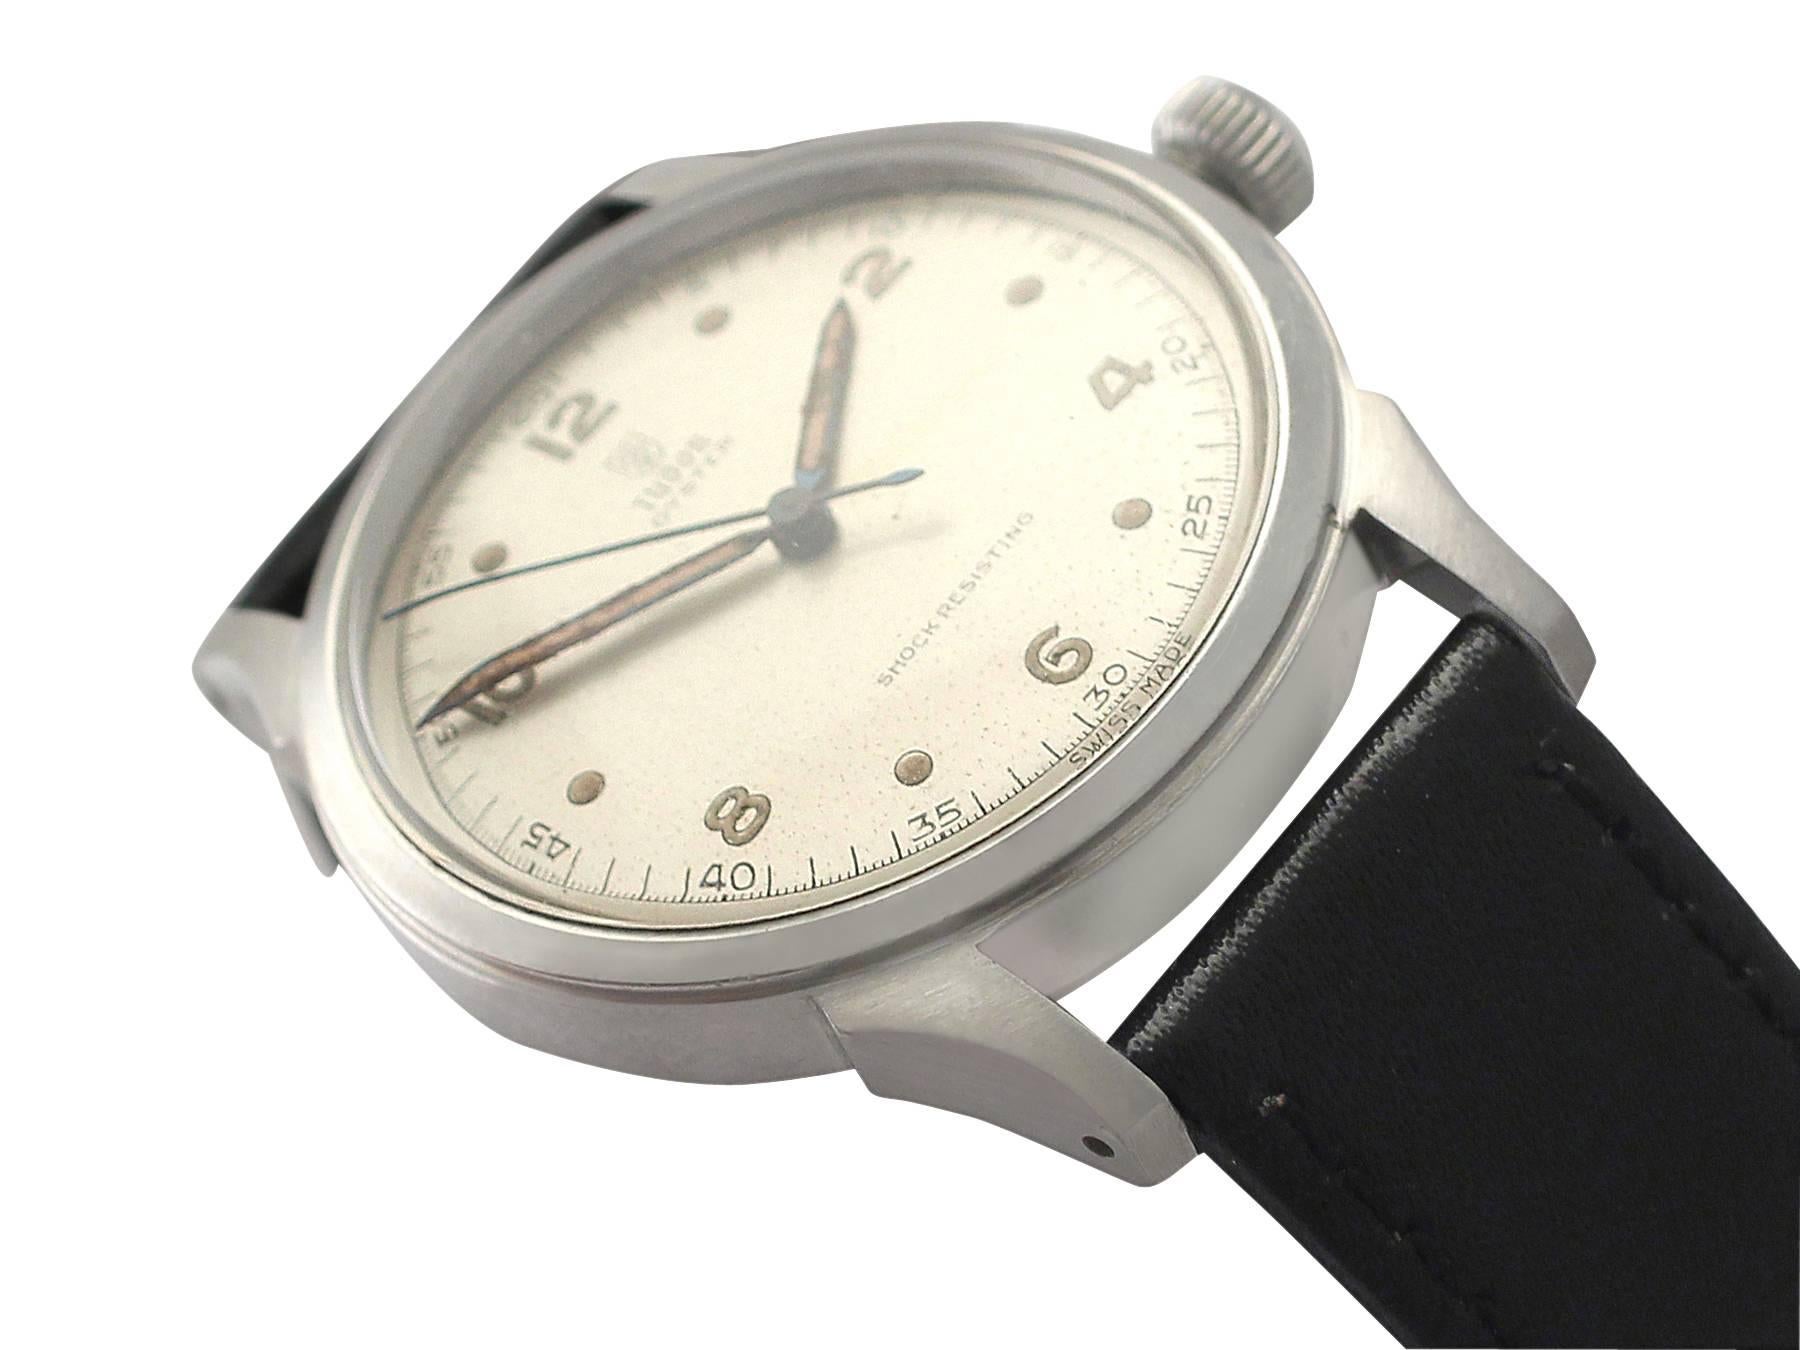 An authentic vintage Tudor Oyster gent's wrist watch in stainless steel; part of our vintage and pre-owned watch collection

This fine vintage Tudor* gentleman's watch has a genuine stainless steel Oyster case.

The off white watch face is